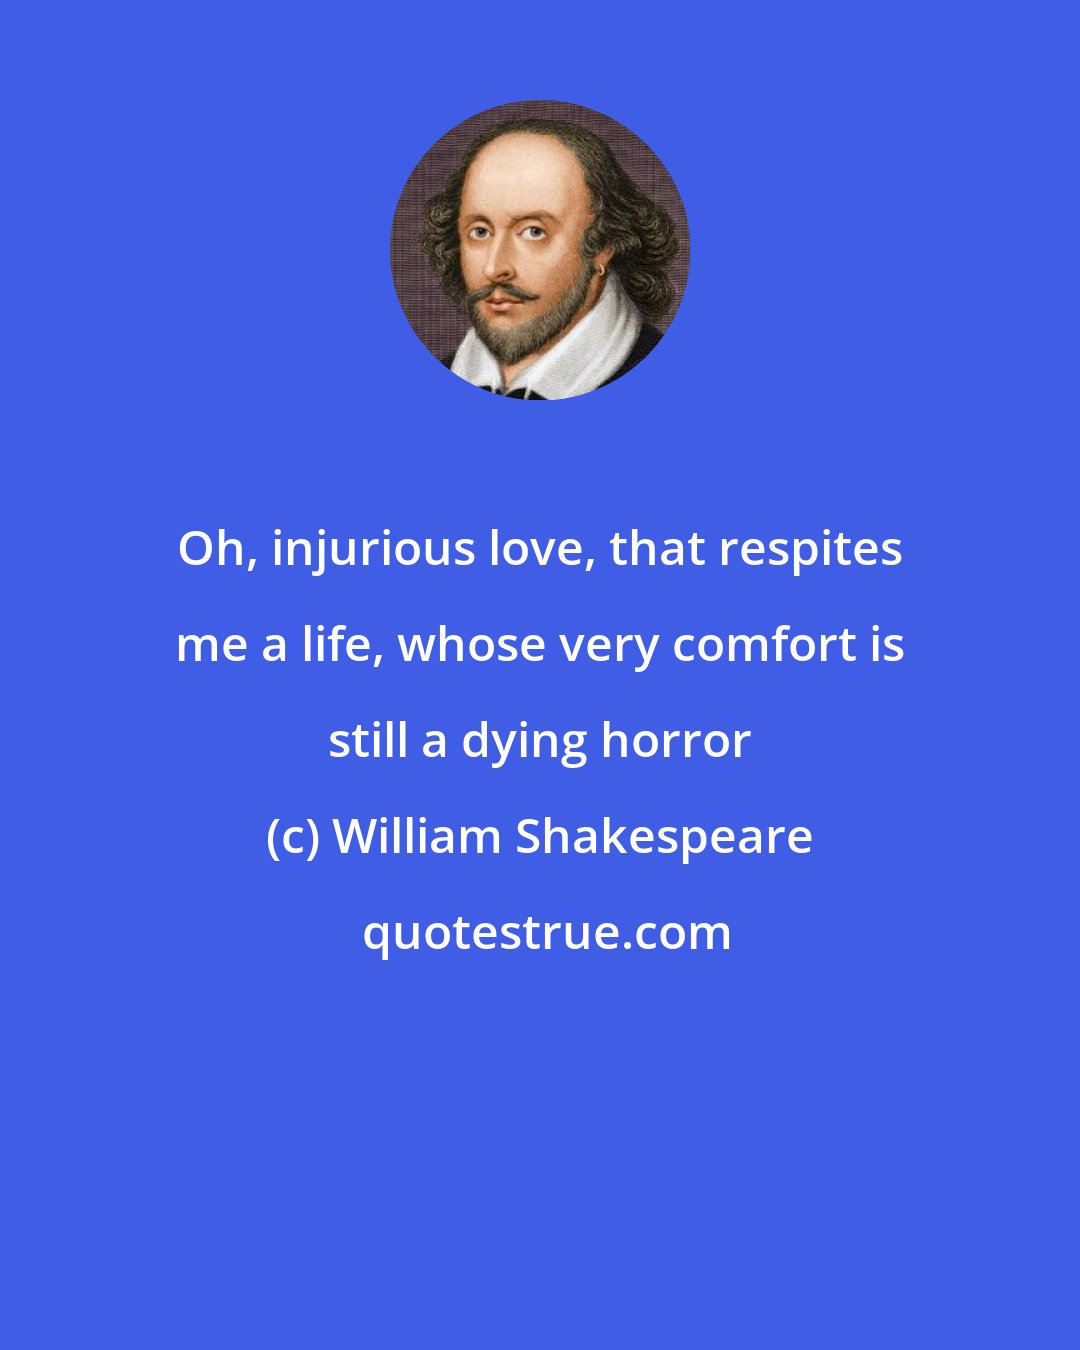 William Shakespeare: Oh, injurious love, that respites me a life, whose very comfort is still a dying horror